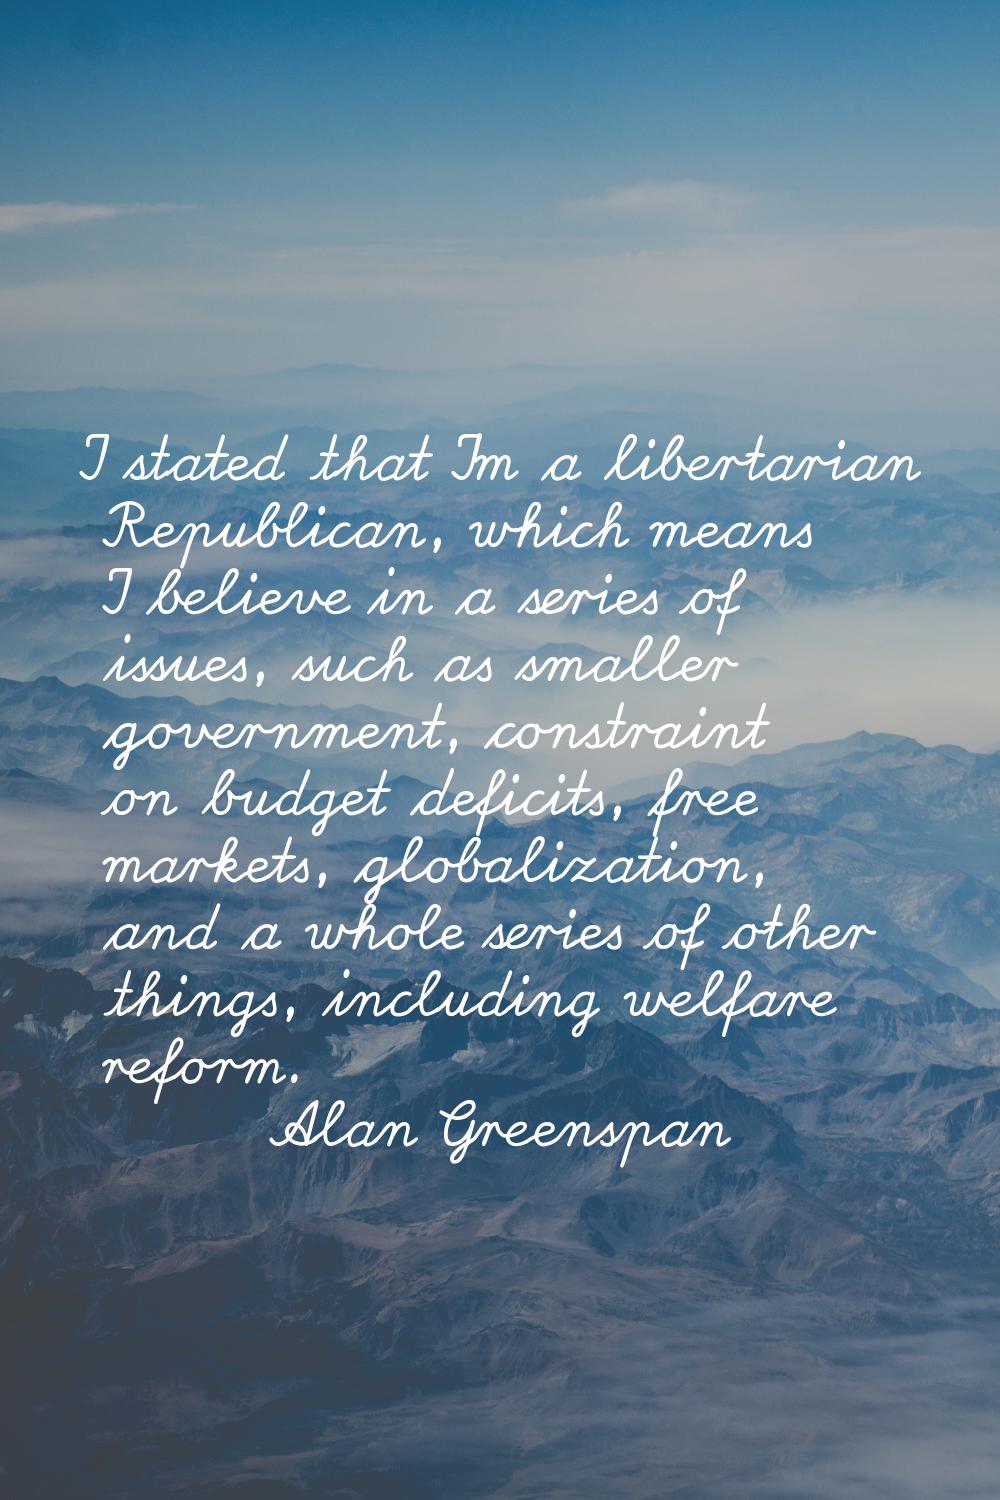 I stated that I'm a libertarian Republican, which means I believe in a series of issues, such as sm